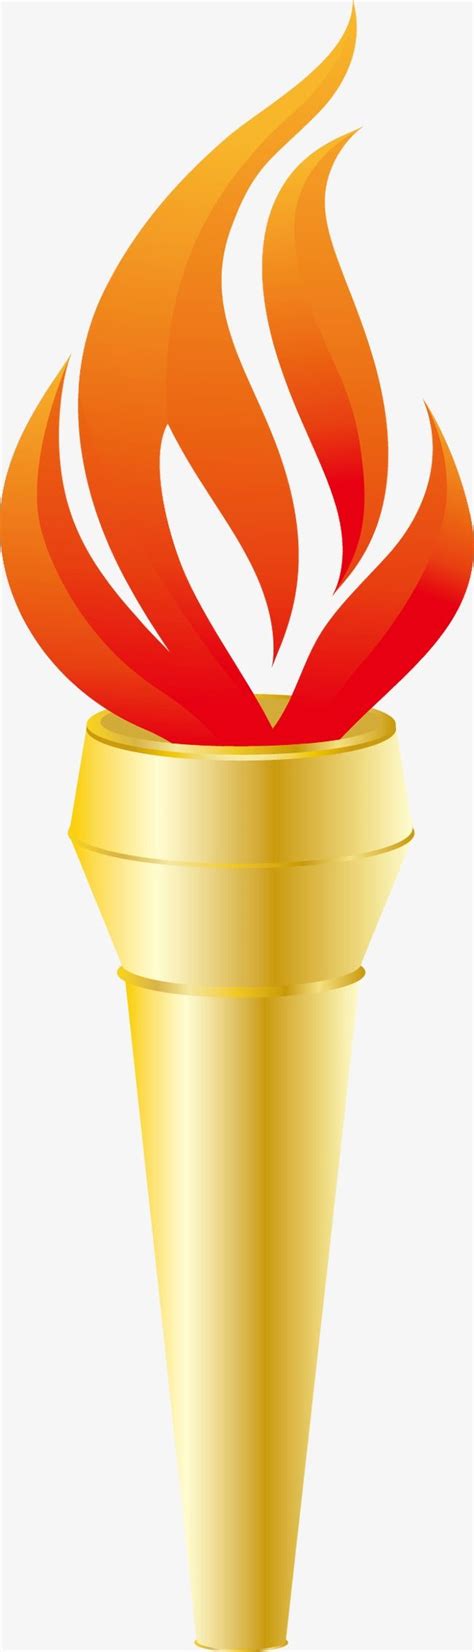 olympic torch silhouette png free burning torch vector silhouettes olympic torch torch